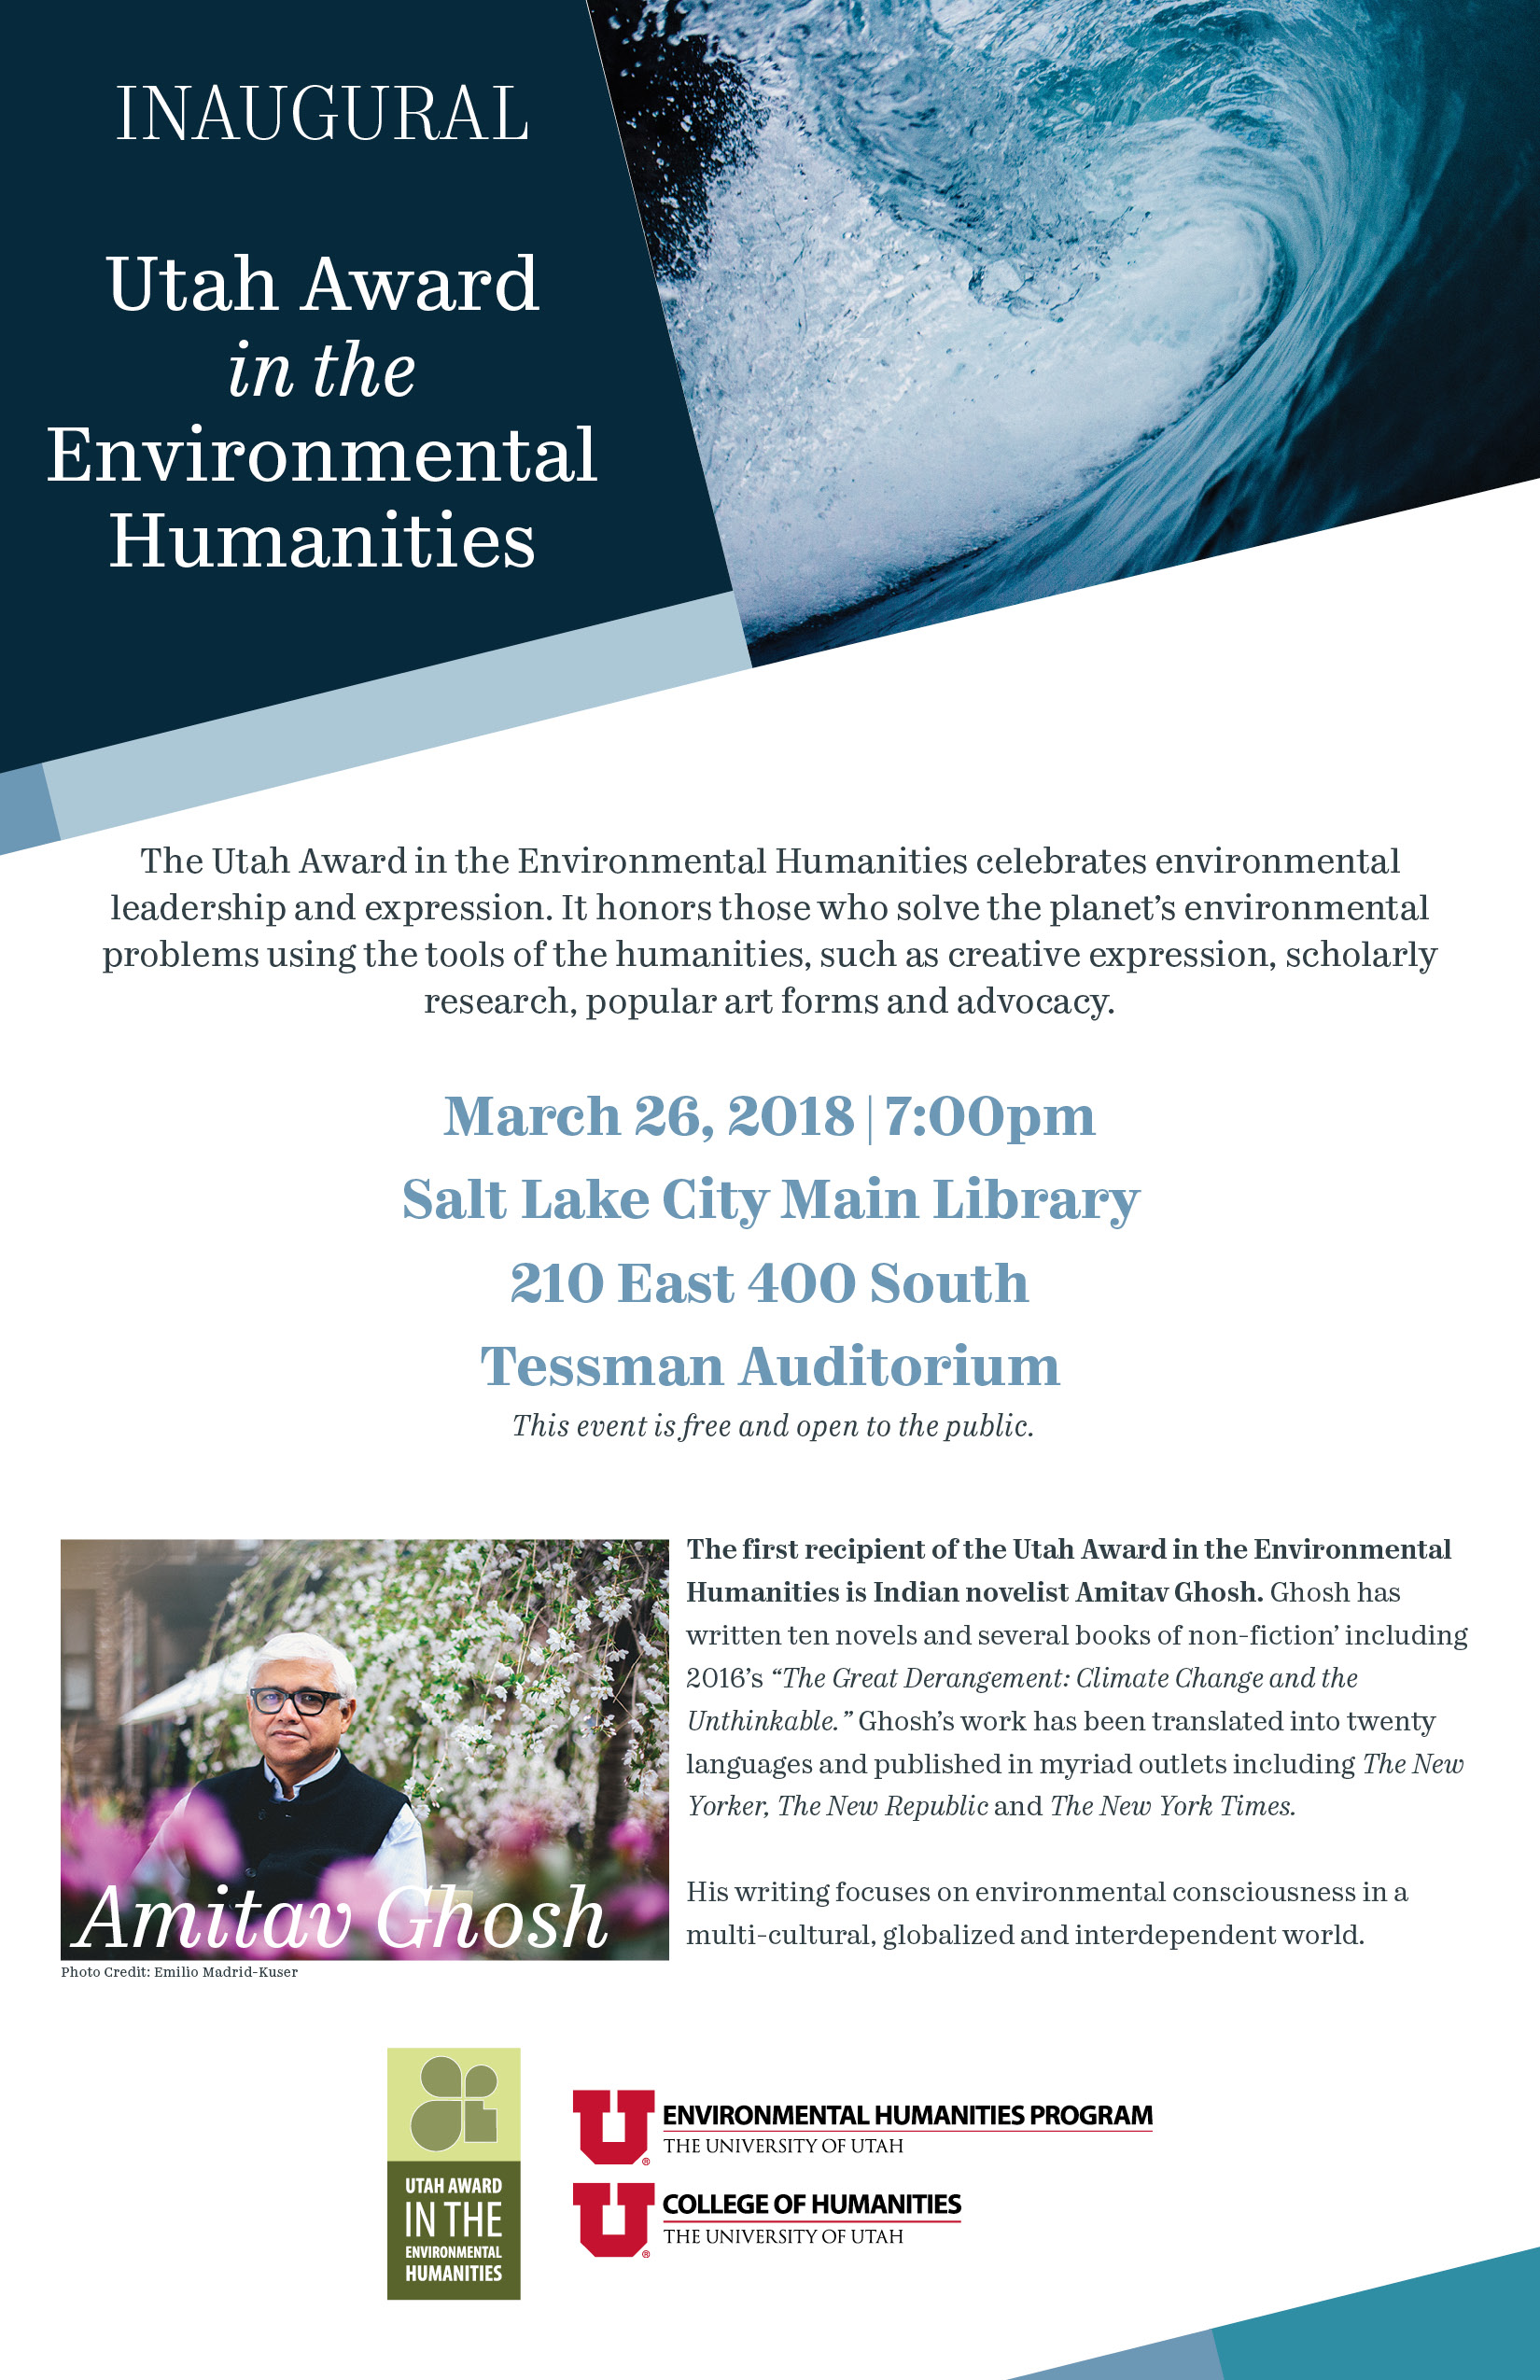 The Utah Award in the Environmental Humanities celebrates environmental leadership and expression. It honors those who solve the planets environmental problems using the tools of the humanities, such as creative expression, scholarly research, popular art forms and advocacy.  March 26, 2018 | 7:00pm Salt Lake City Main Library 210 East 400 South Tessman Auditorium  This event is free and open to the public.  The first recipient of the Utah Award in the Environmental Humanities is Indian novelist Amitav Ghosh. Ghosh has written ten novels and several books of non-fiction including 2016s The Great Derangement: Climate Change and the Unthinkable. Ghoshs work has been translated into twenty languages and published in myriad outlets including The New Yorker, The New Republic and The New York Times.  His writing focuses on environmental consciousness in a multi-cultural, globalized and interdependent world.